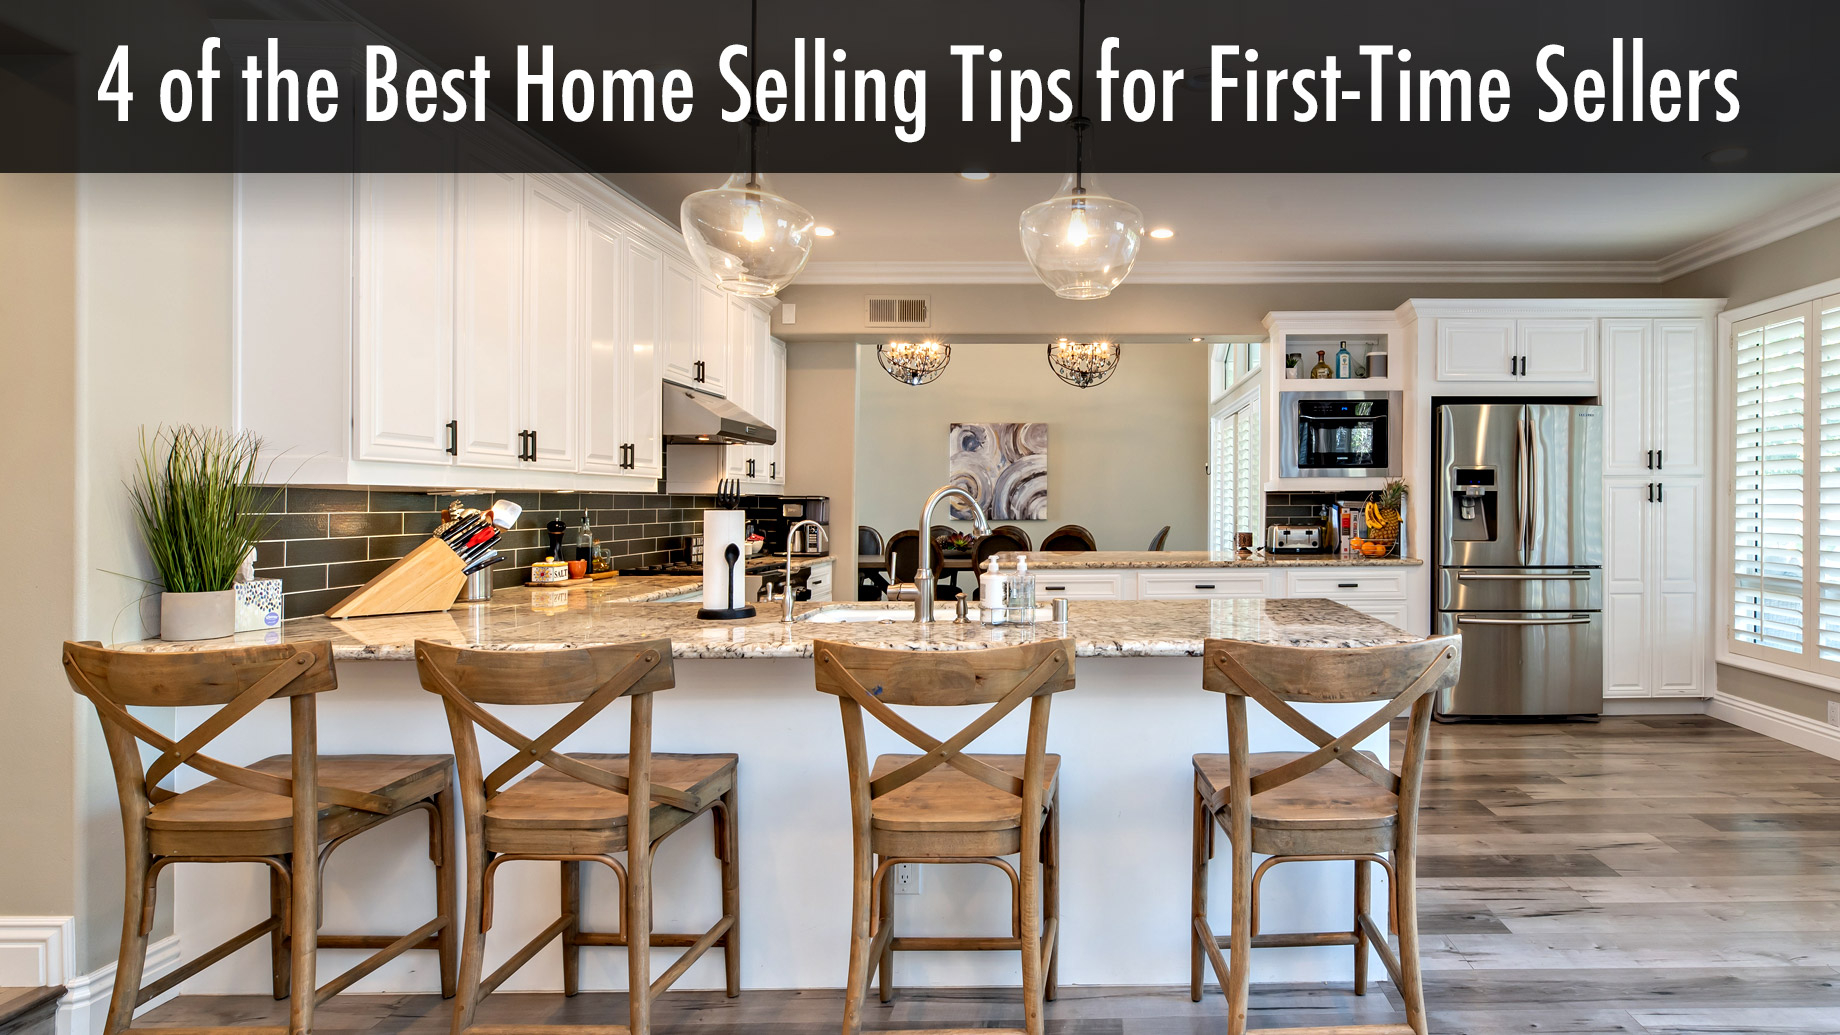 4 of the Best Home Selling Tips for First-Time Sellers